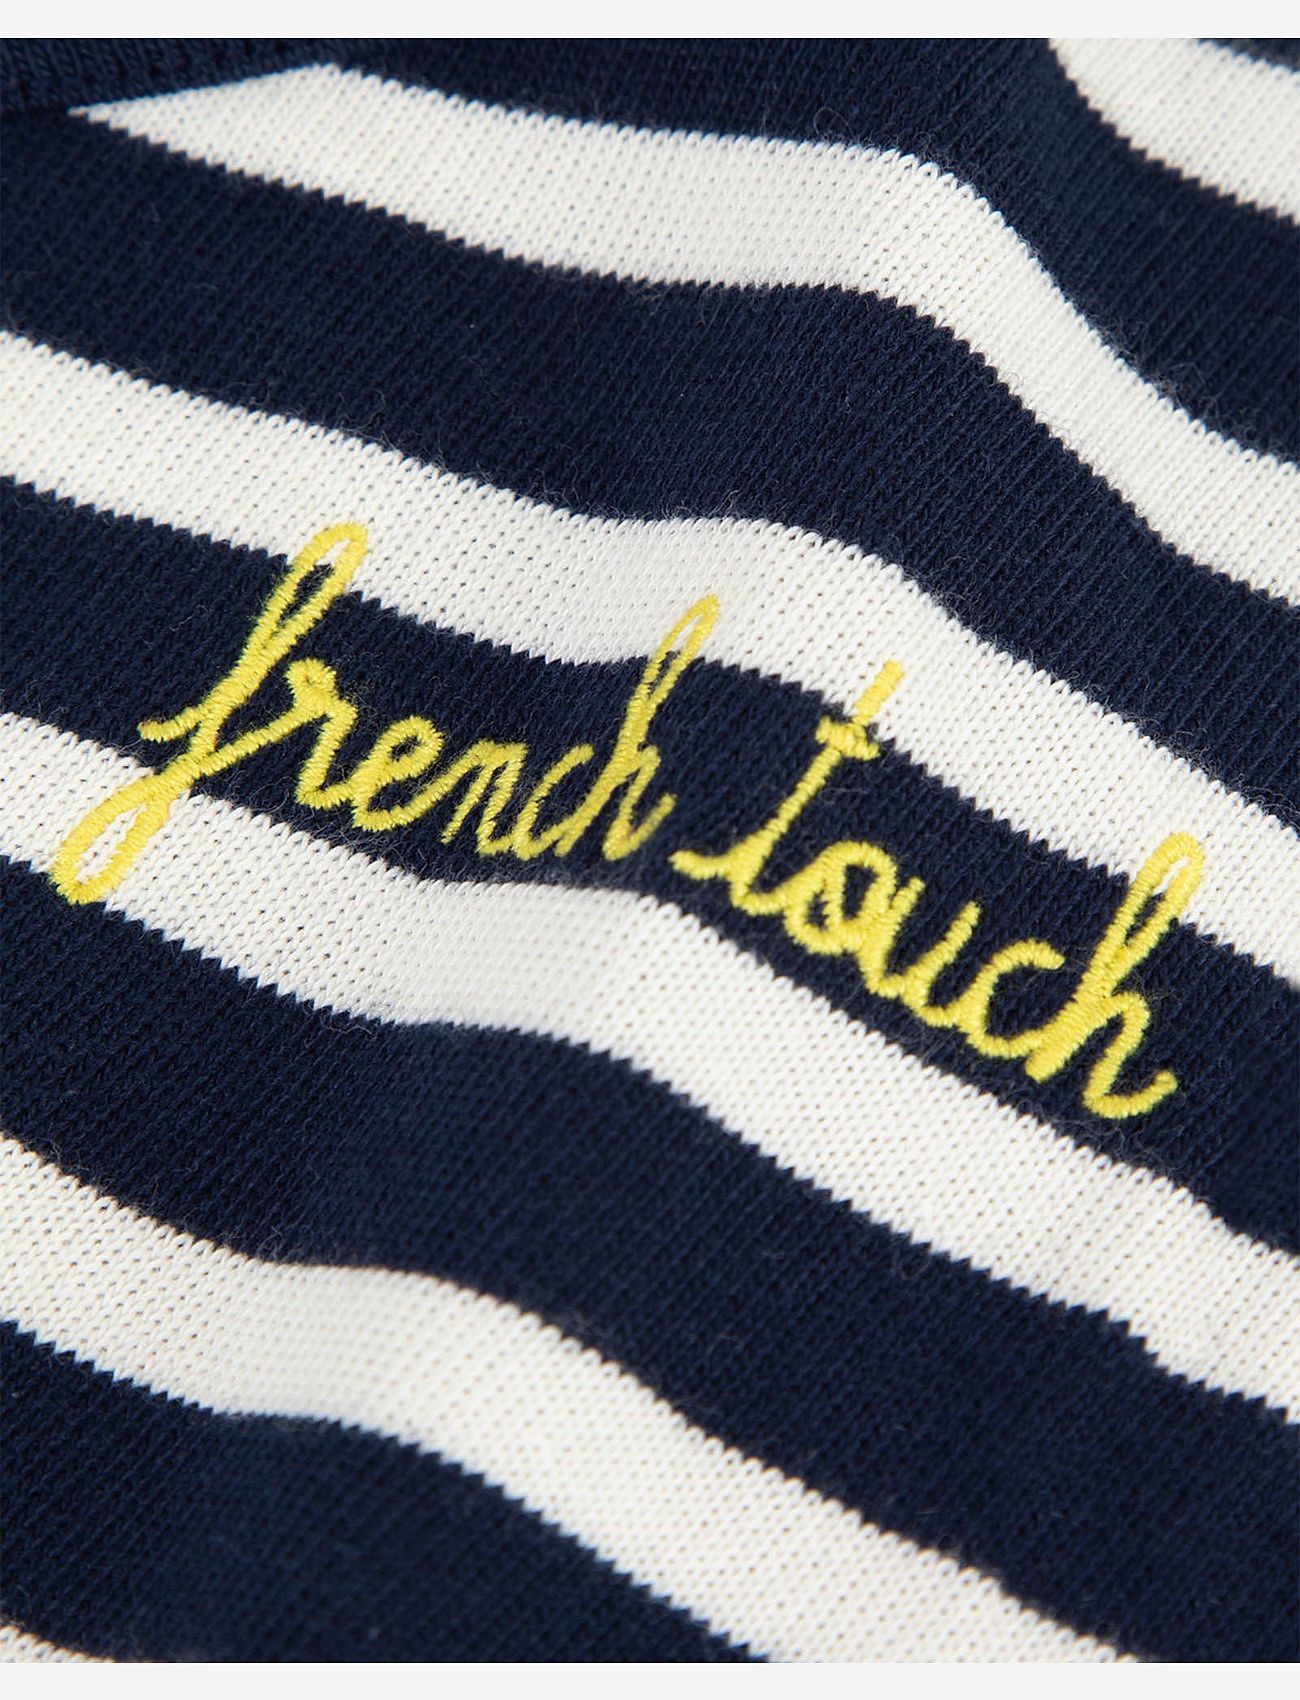 Maison Labiche Paris - CAIN ML FRENCH TOUCH/GOTS - long-sleeved - navy ivory - 1